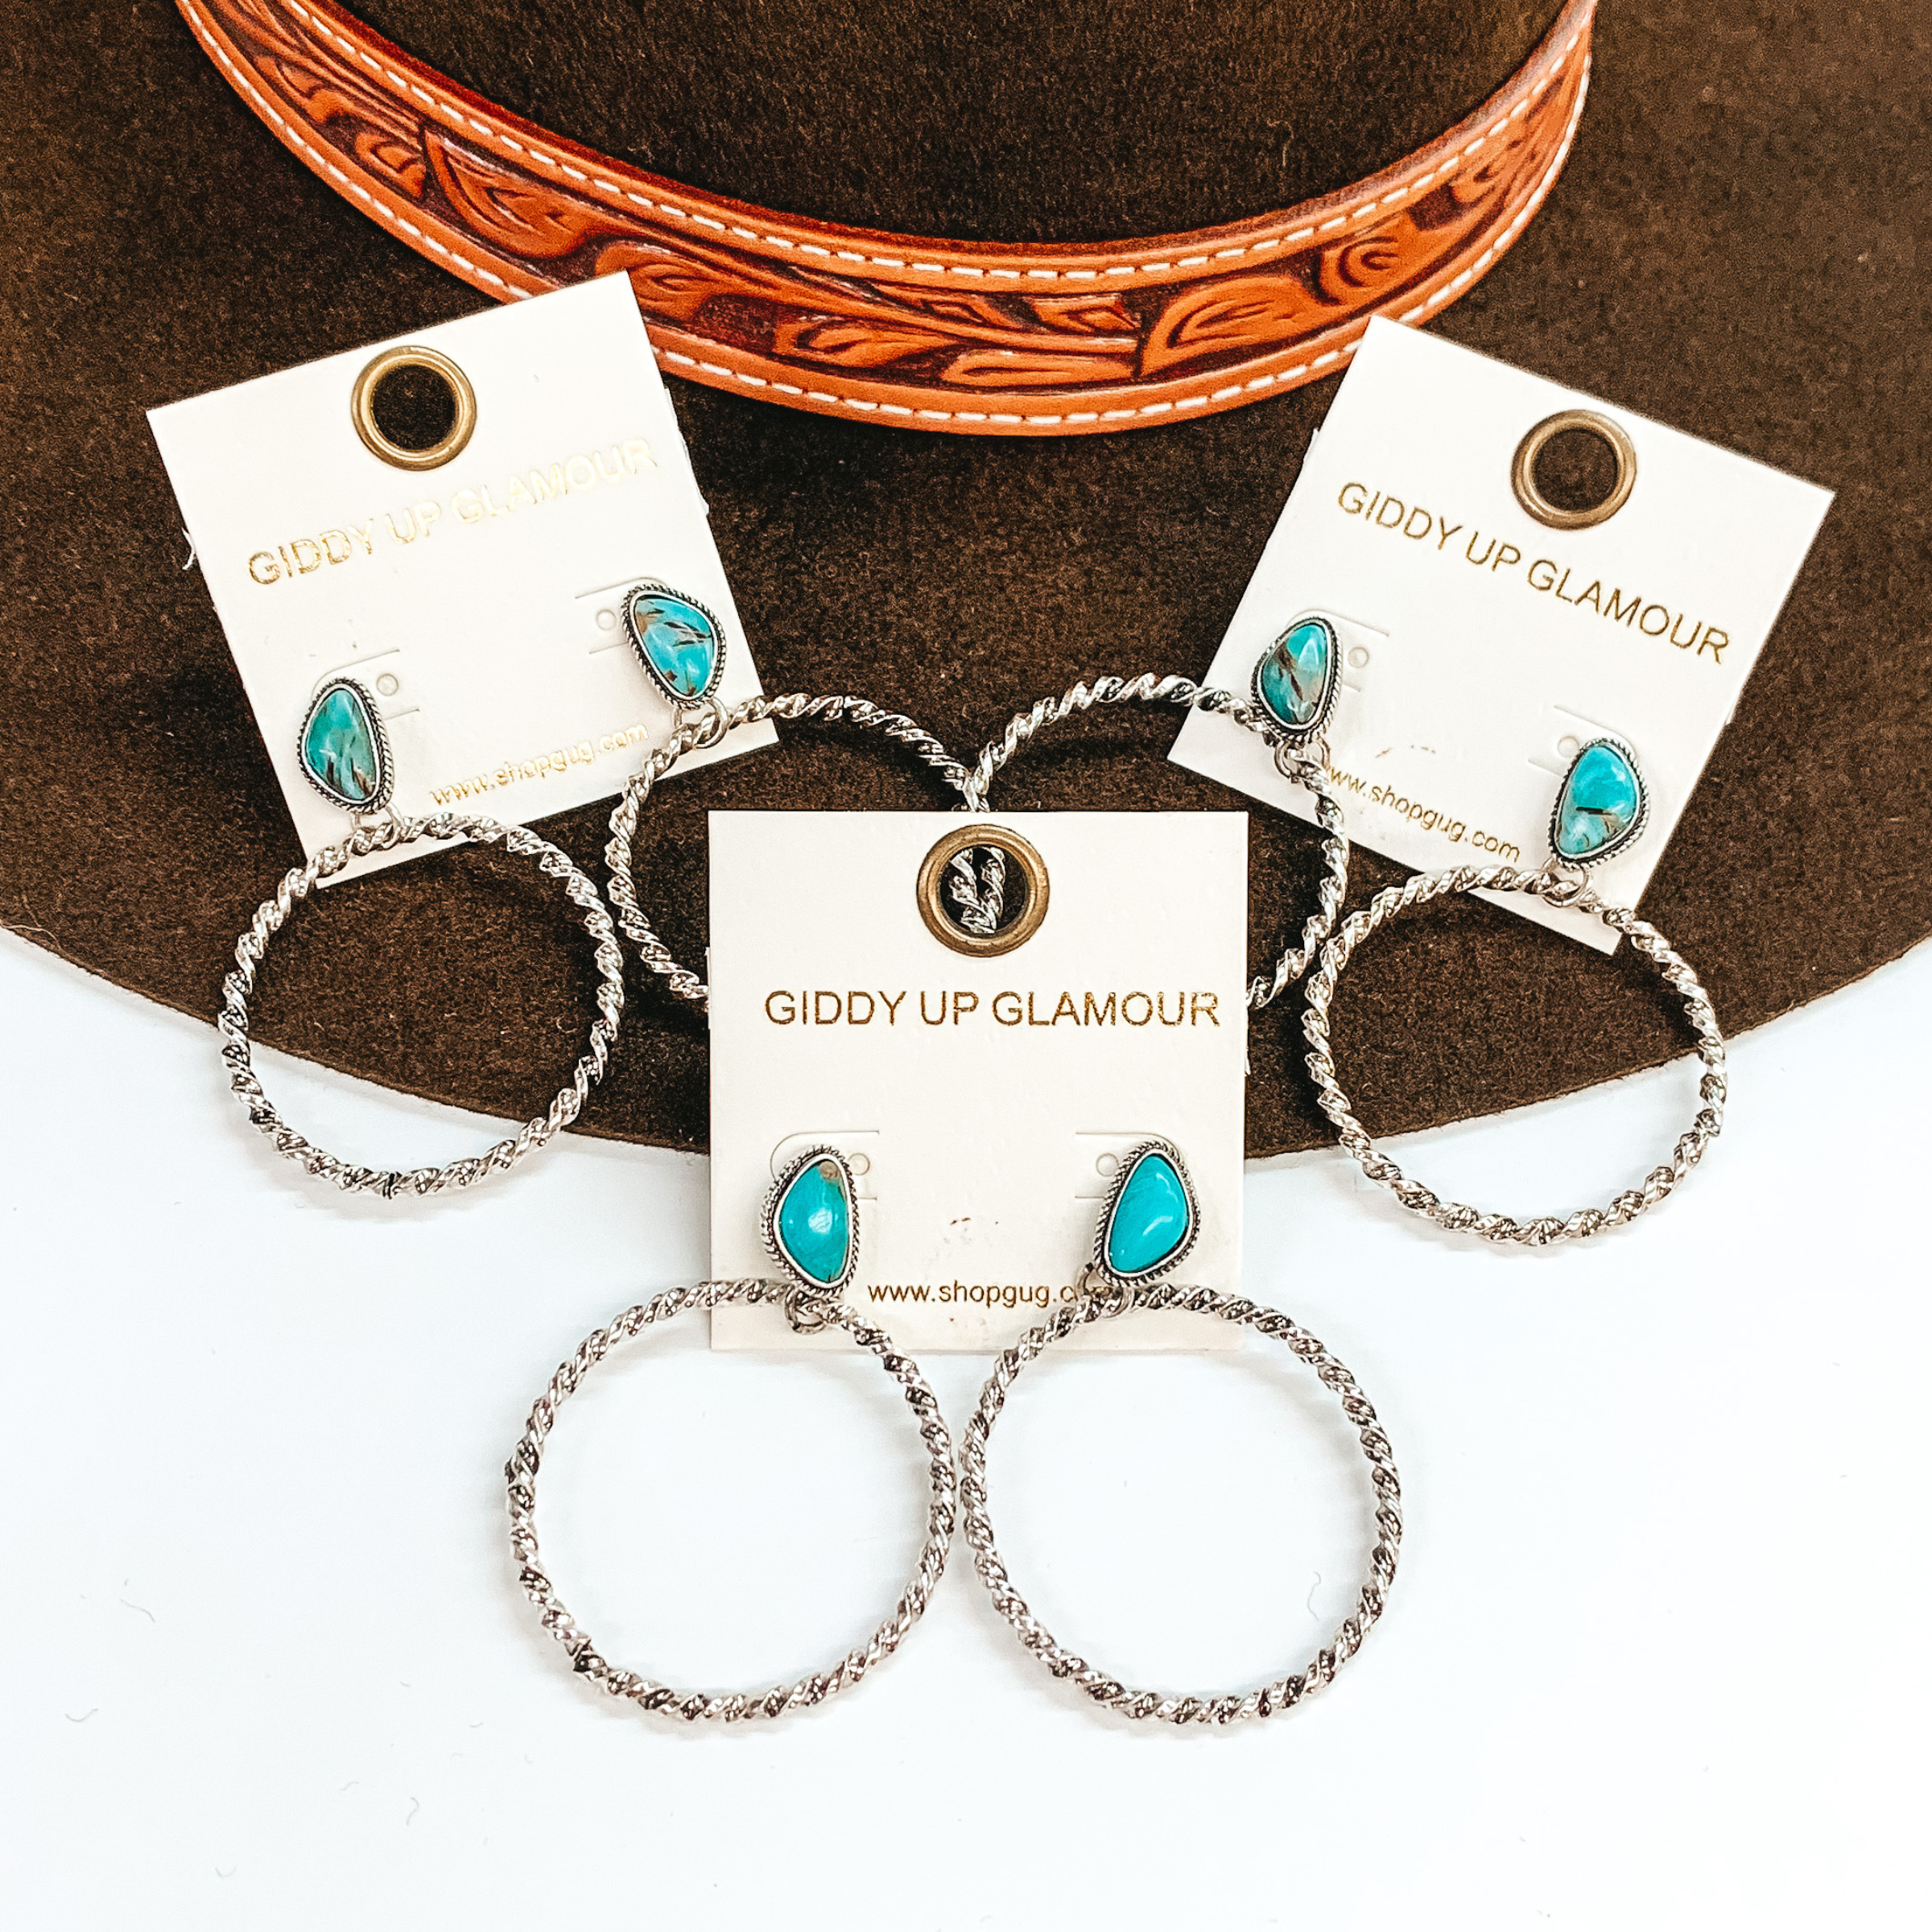 These are three pairs of silver circle drop earrings with an asymmetrical  turquoise stone post backing. The circle drop has a twisted  rope texture in silver. These earrings are taken laying on  a dark brown hat brim  and on a white background.